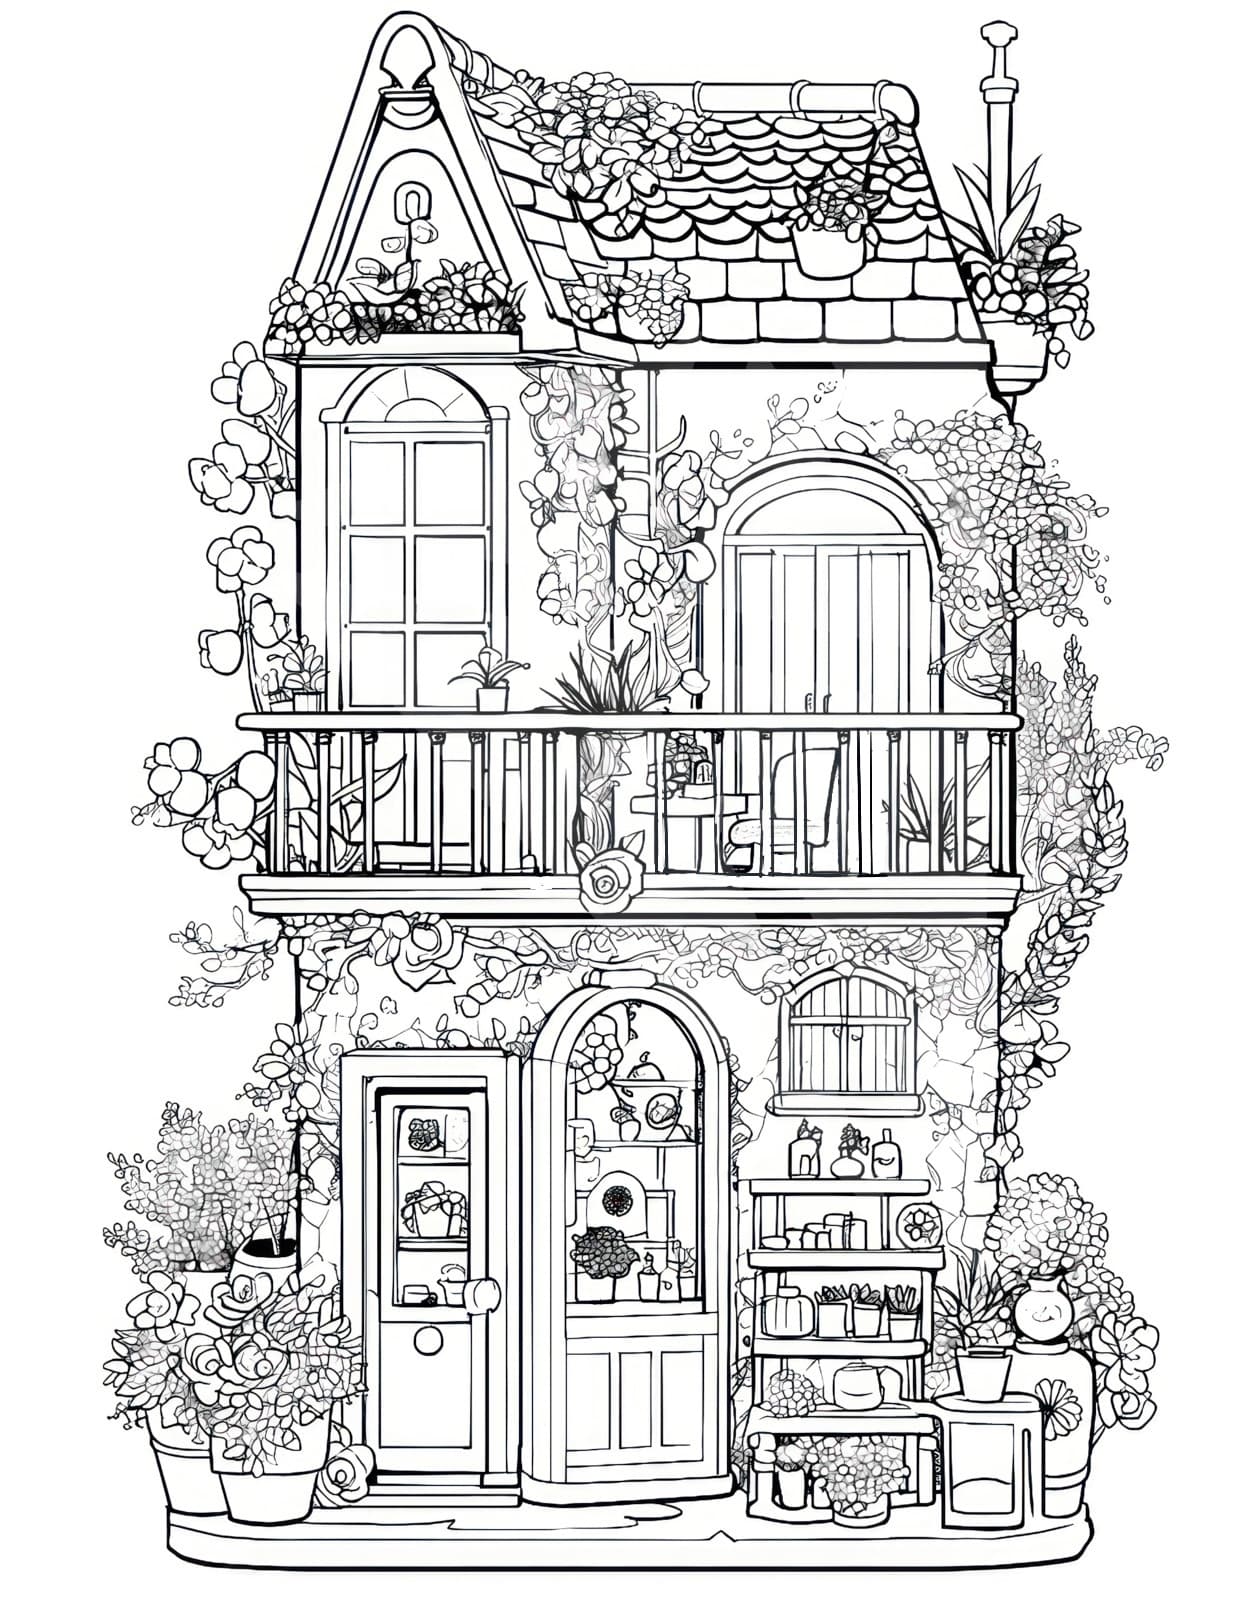 House coloring pages for adults and kids